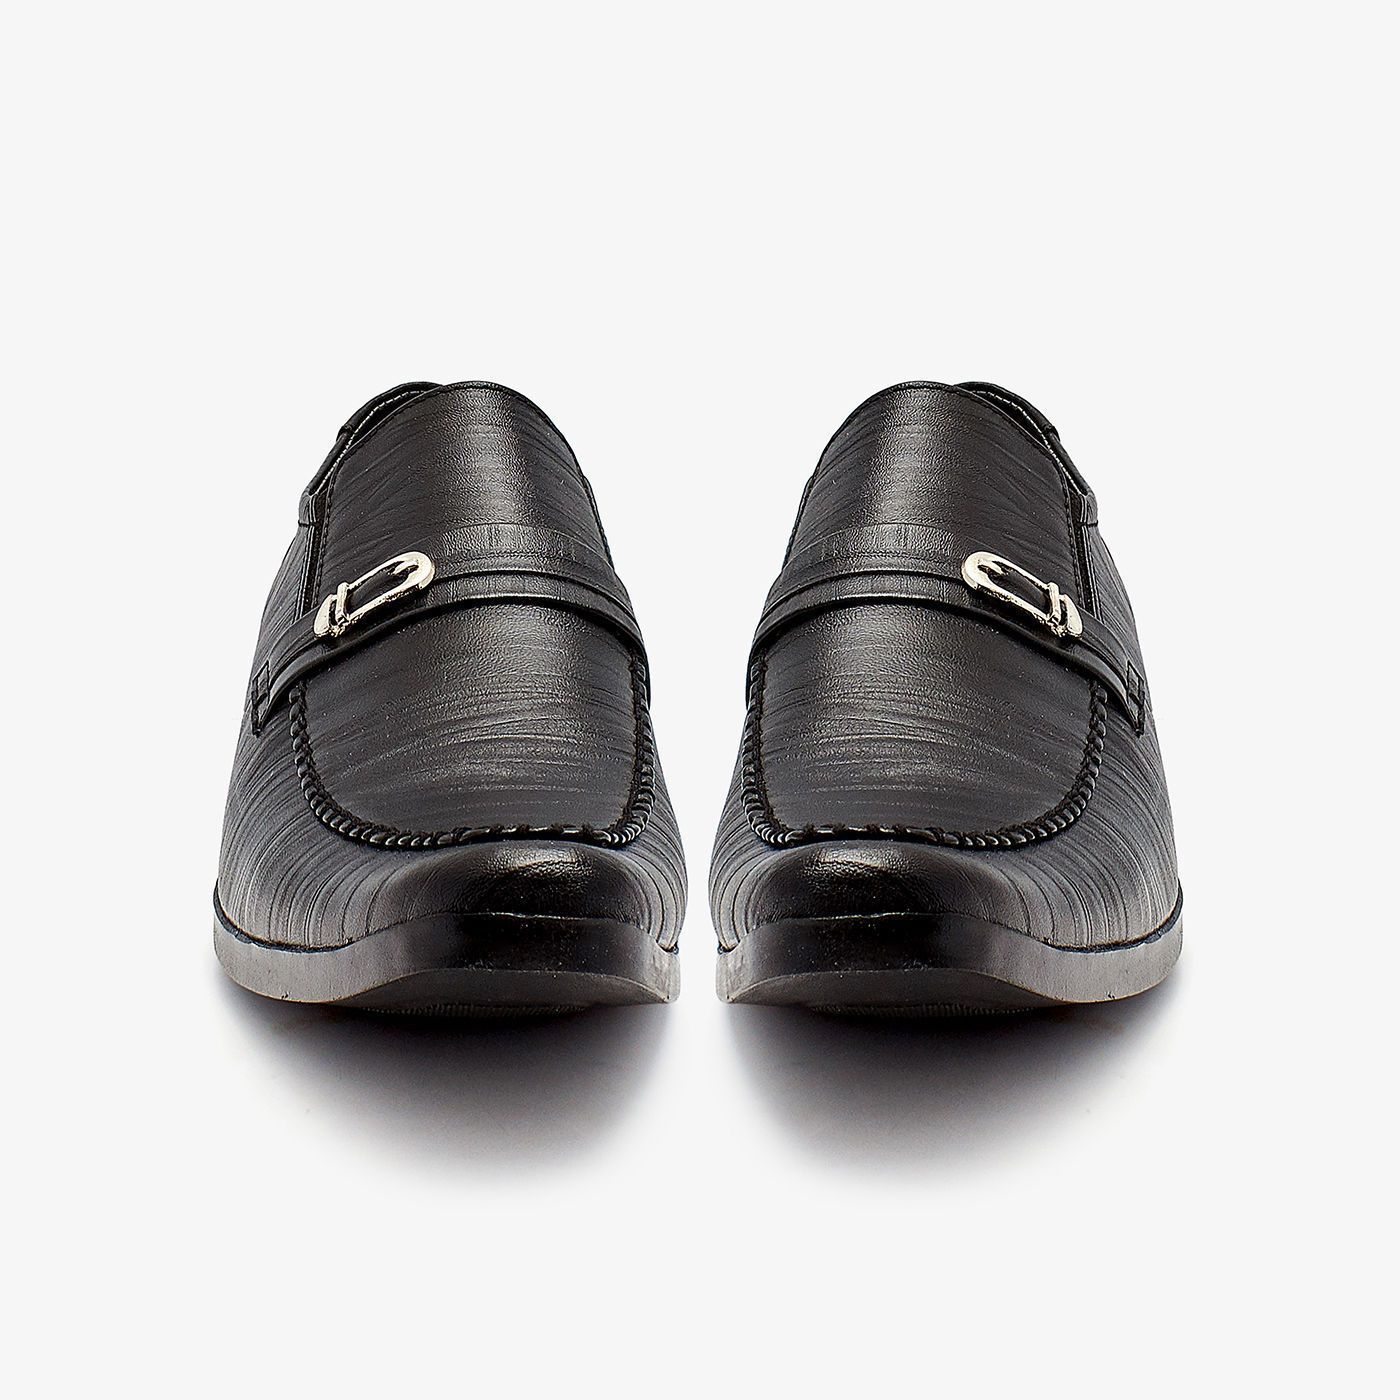 Mens Buckled Loafers